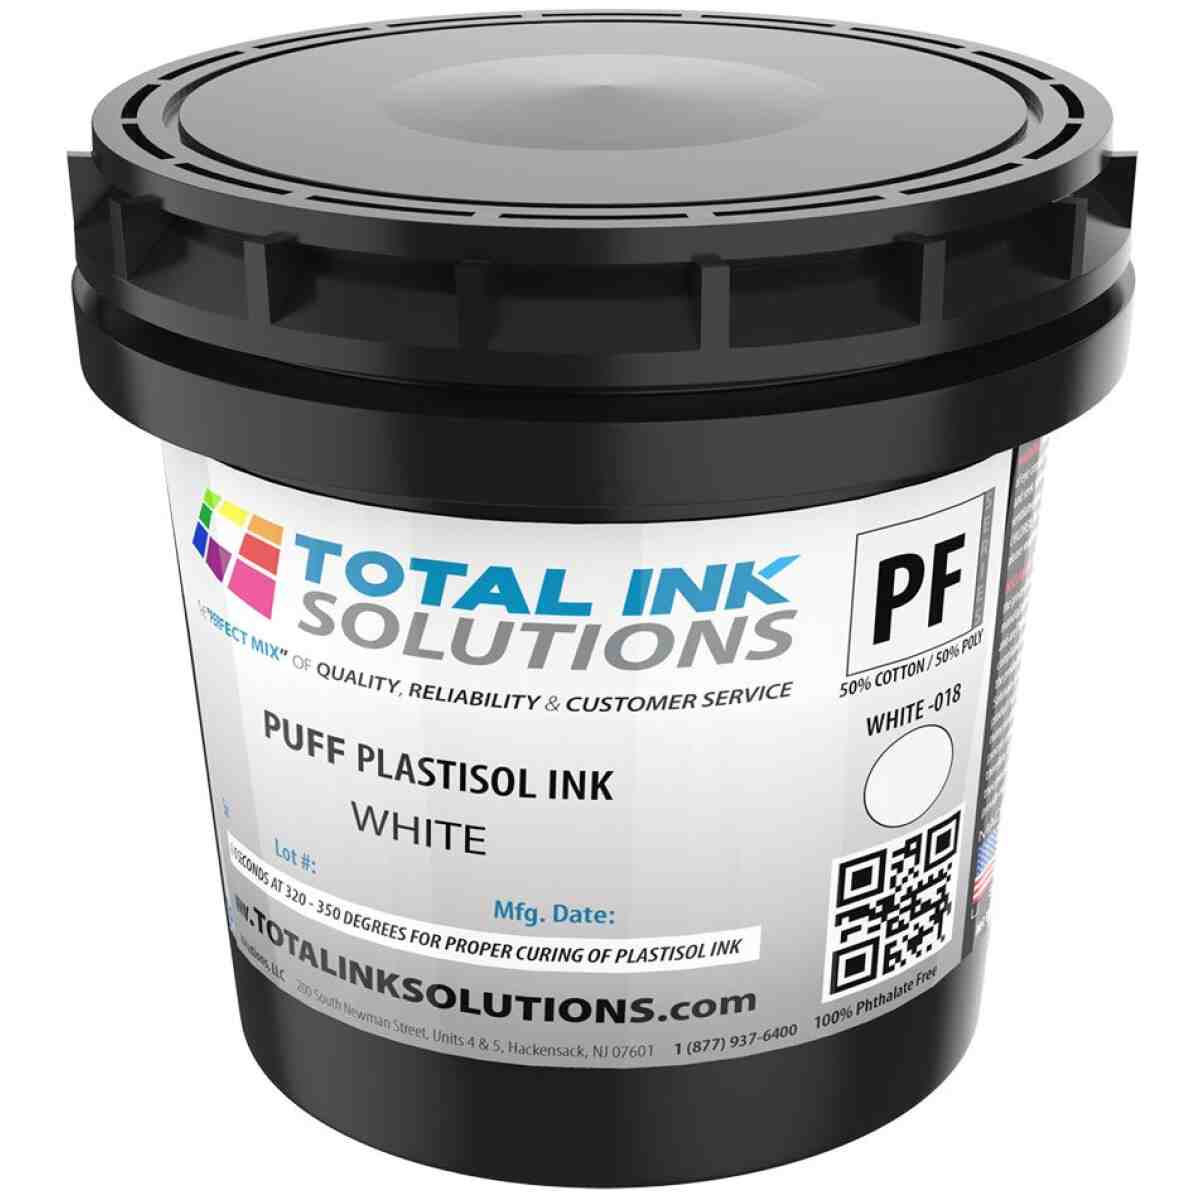 Puff Plastisol Ink - White - Quart TOTAL INK SOLUTIONS®